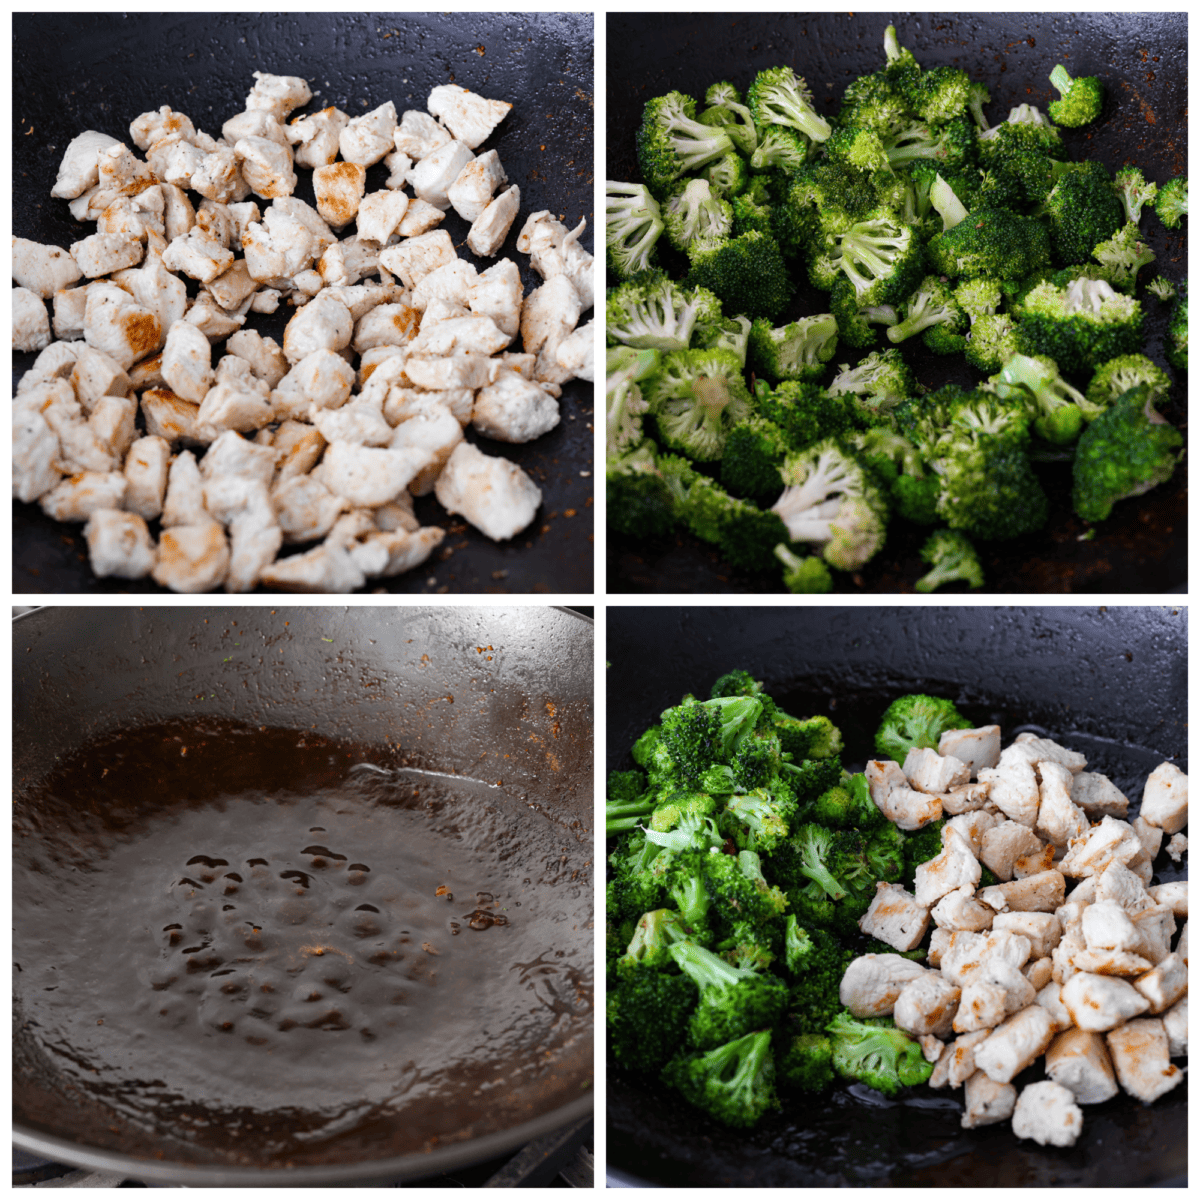 4-photo collage of the chicken, vegetables, and sauce being prepared.